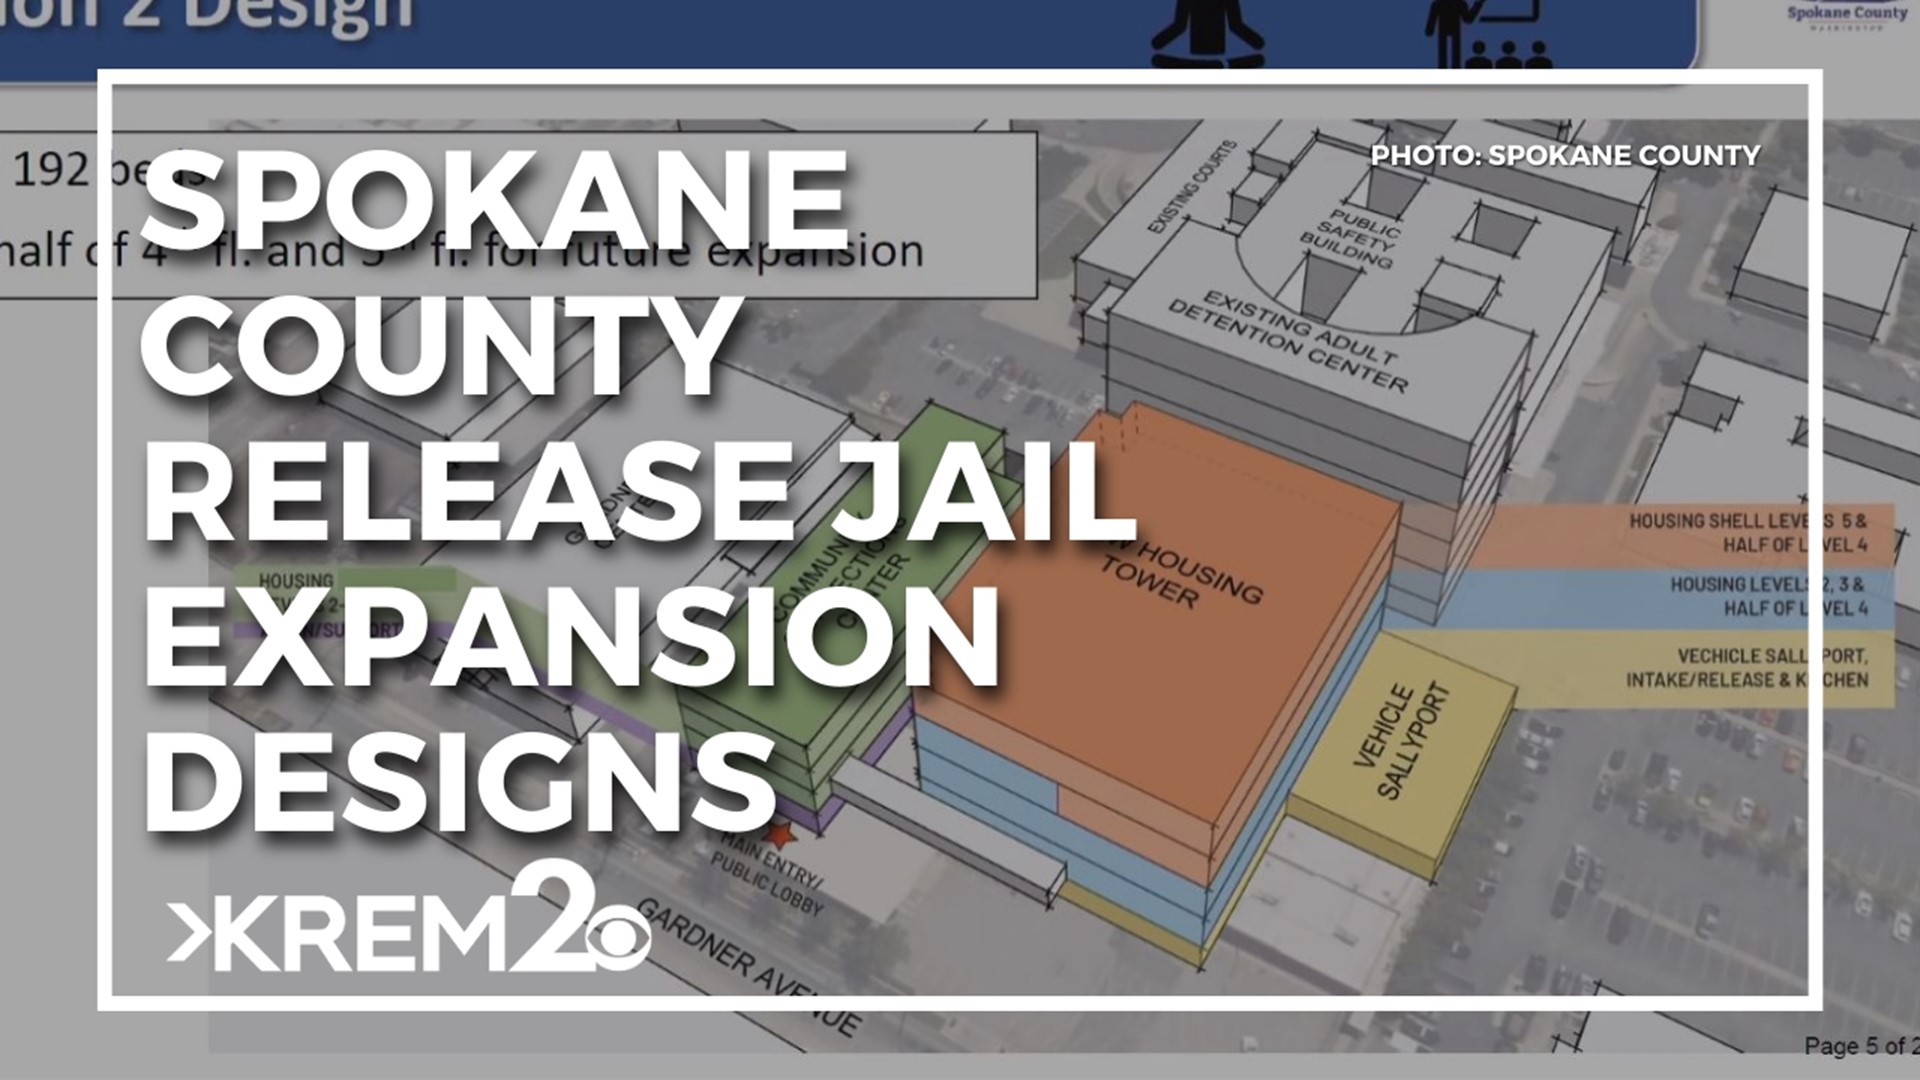 County commissioners are considering two design options for the new Spokane facility.